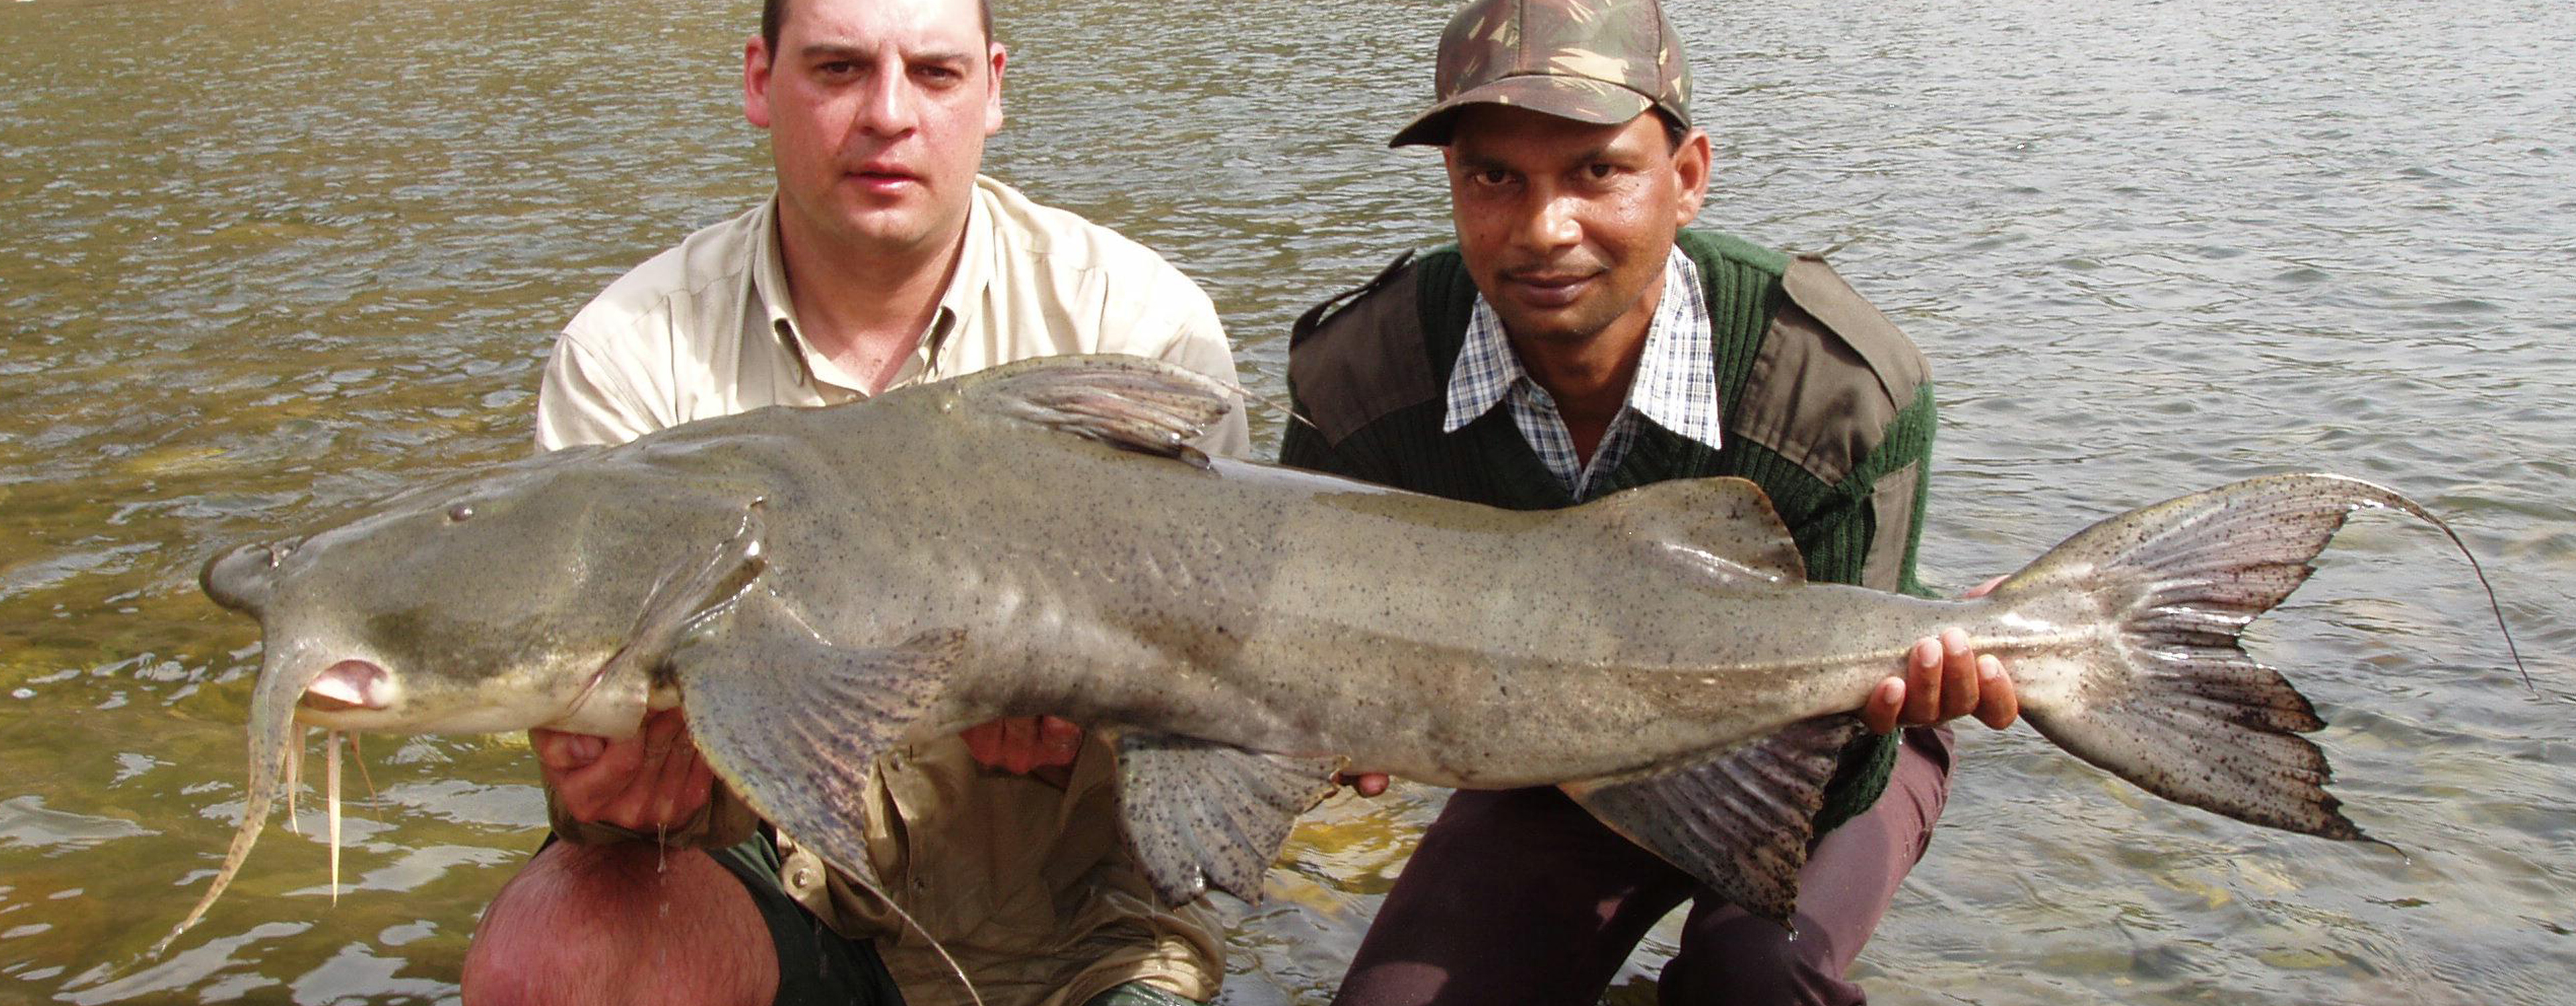 Fishery owner James Peacock holding a Goonch Catfish caught from the Ramganga River within the Corbett National Park in India